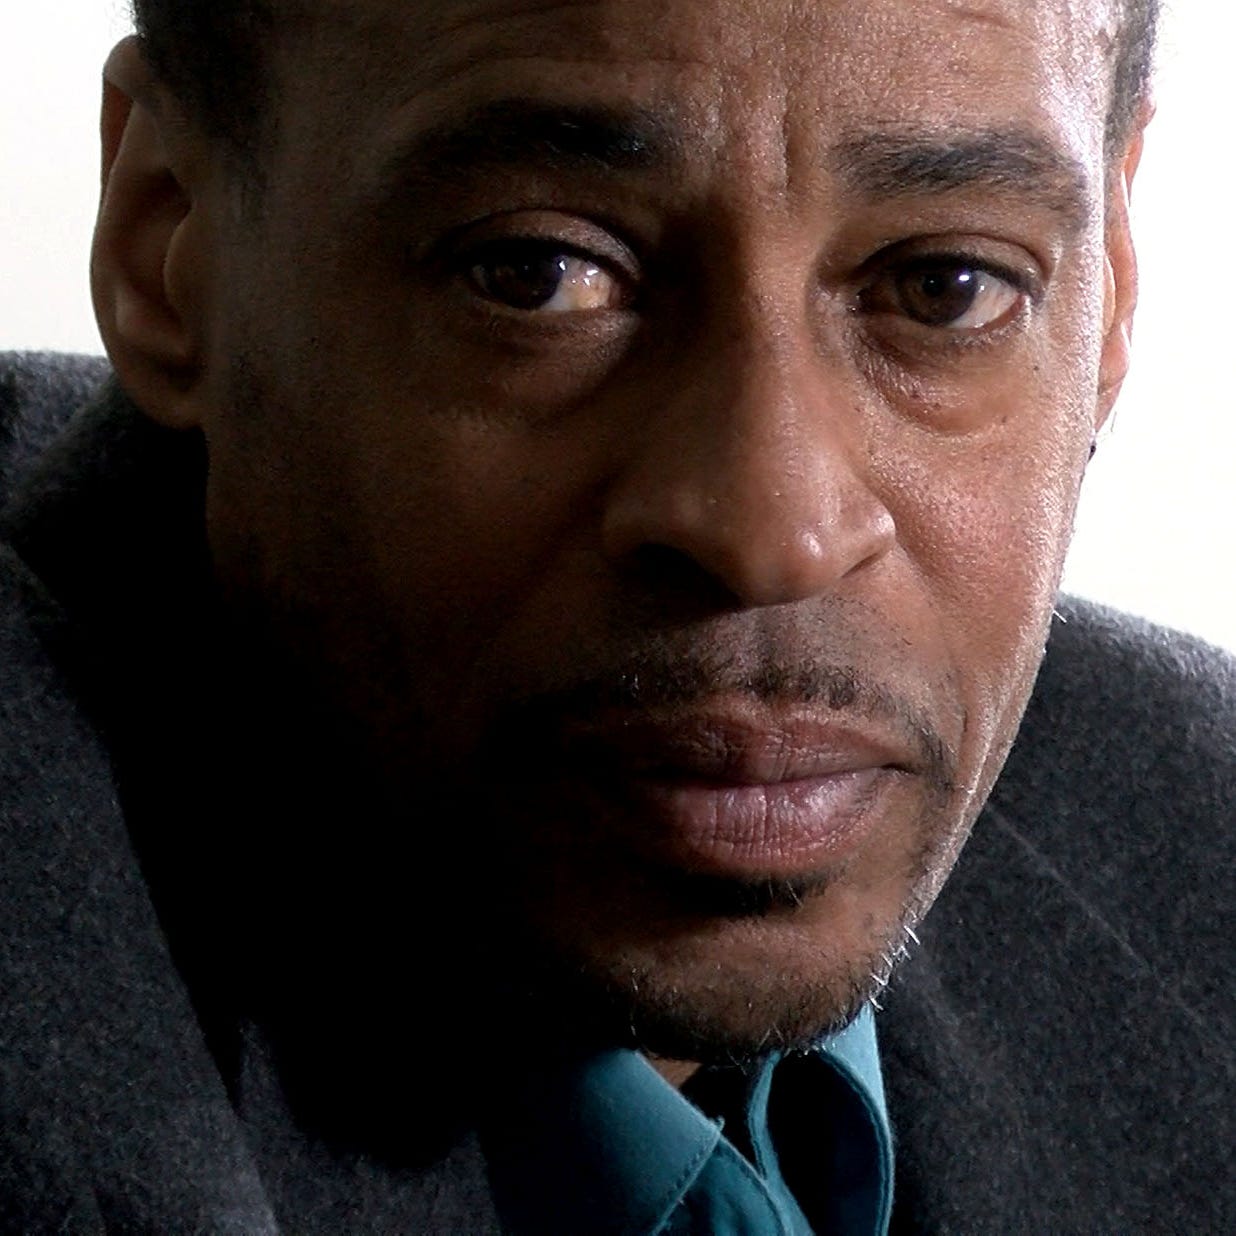 Dion Harrell is shown during an interview at his cousin’s Long Branch home Thursday, February 27, 2020. He has spent almost 28 years trying to prove he was innocent of a rape for which he served four years in prison and appellate judges ruled that he will not be able to collect money from the state for being wrongfully imprisoned.